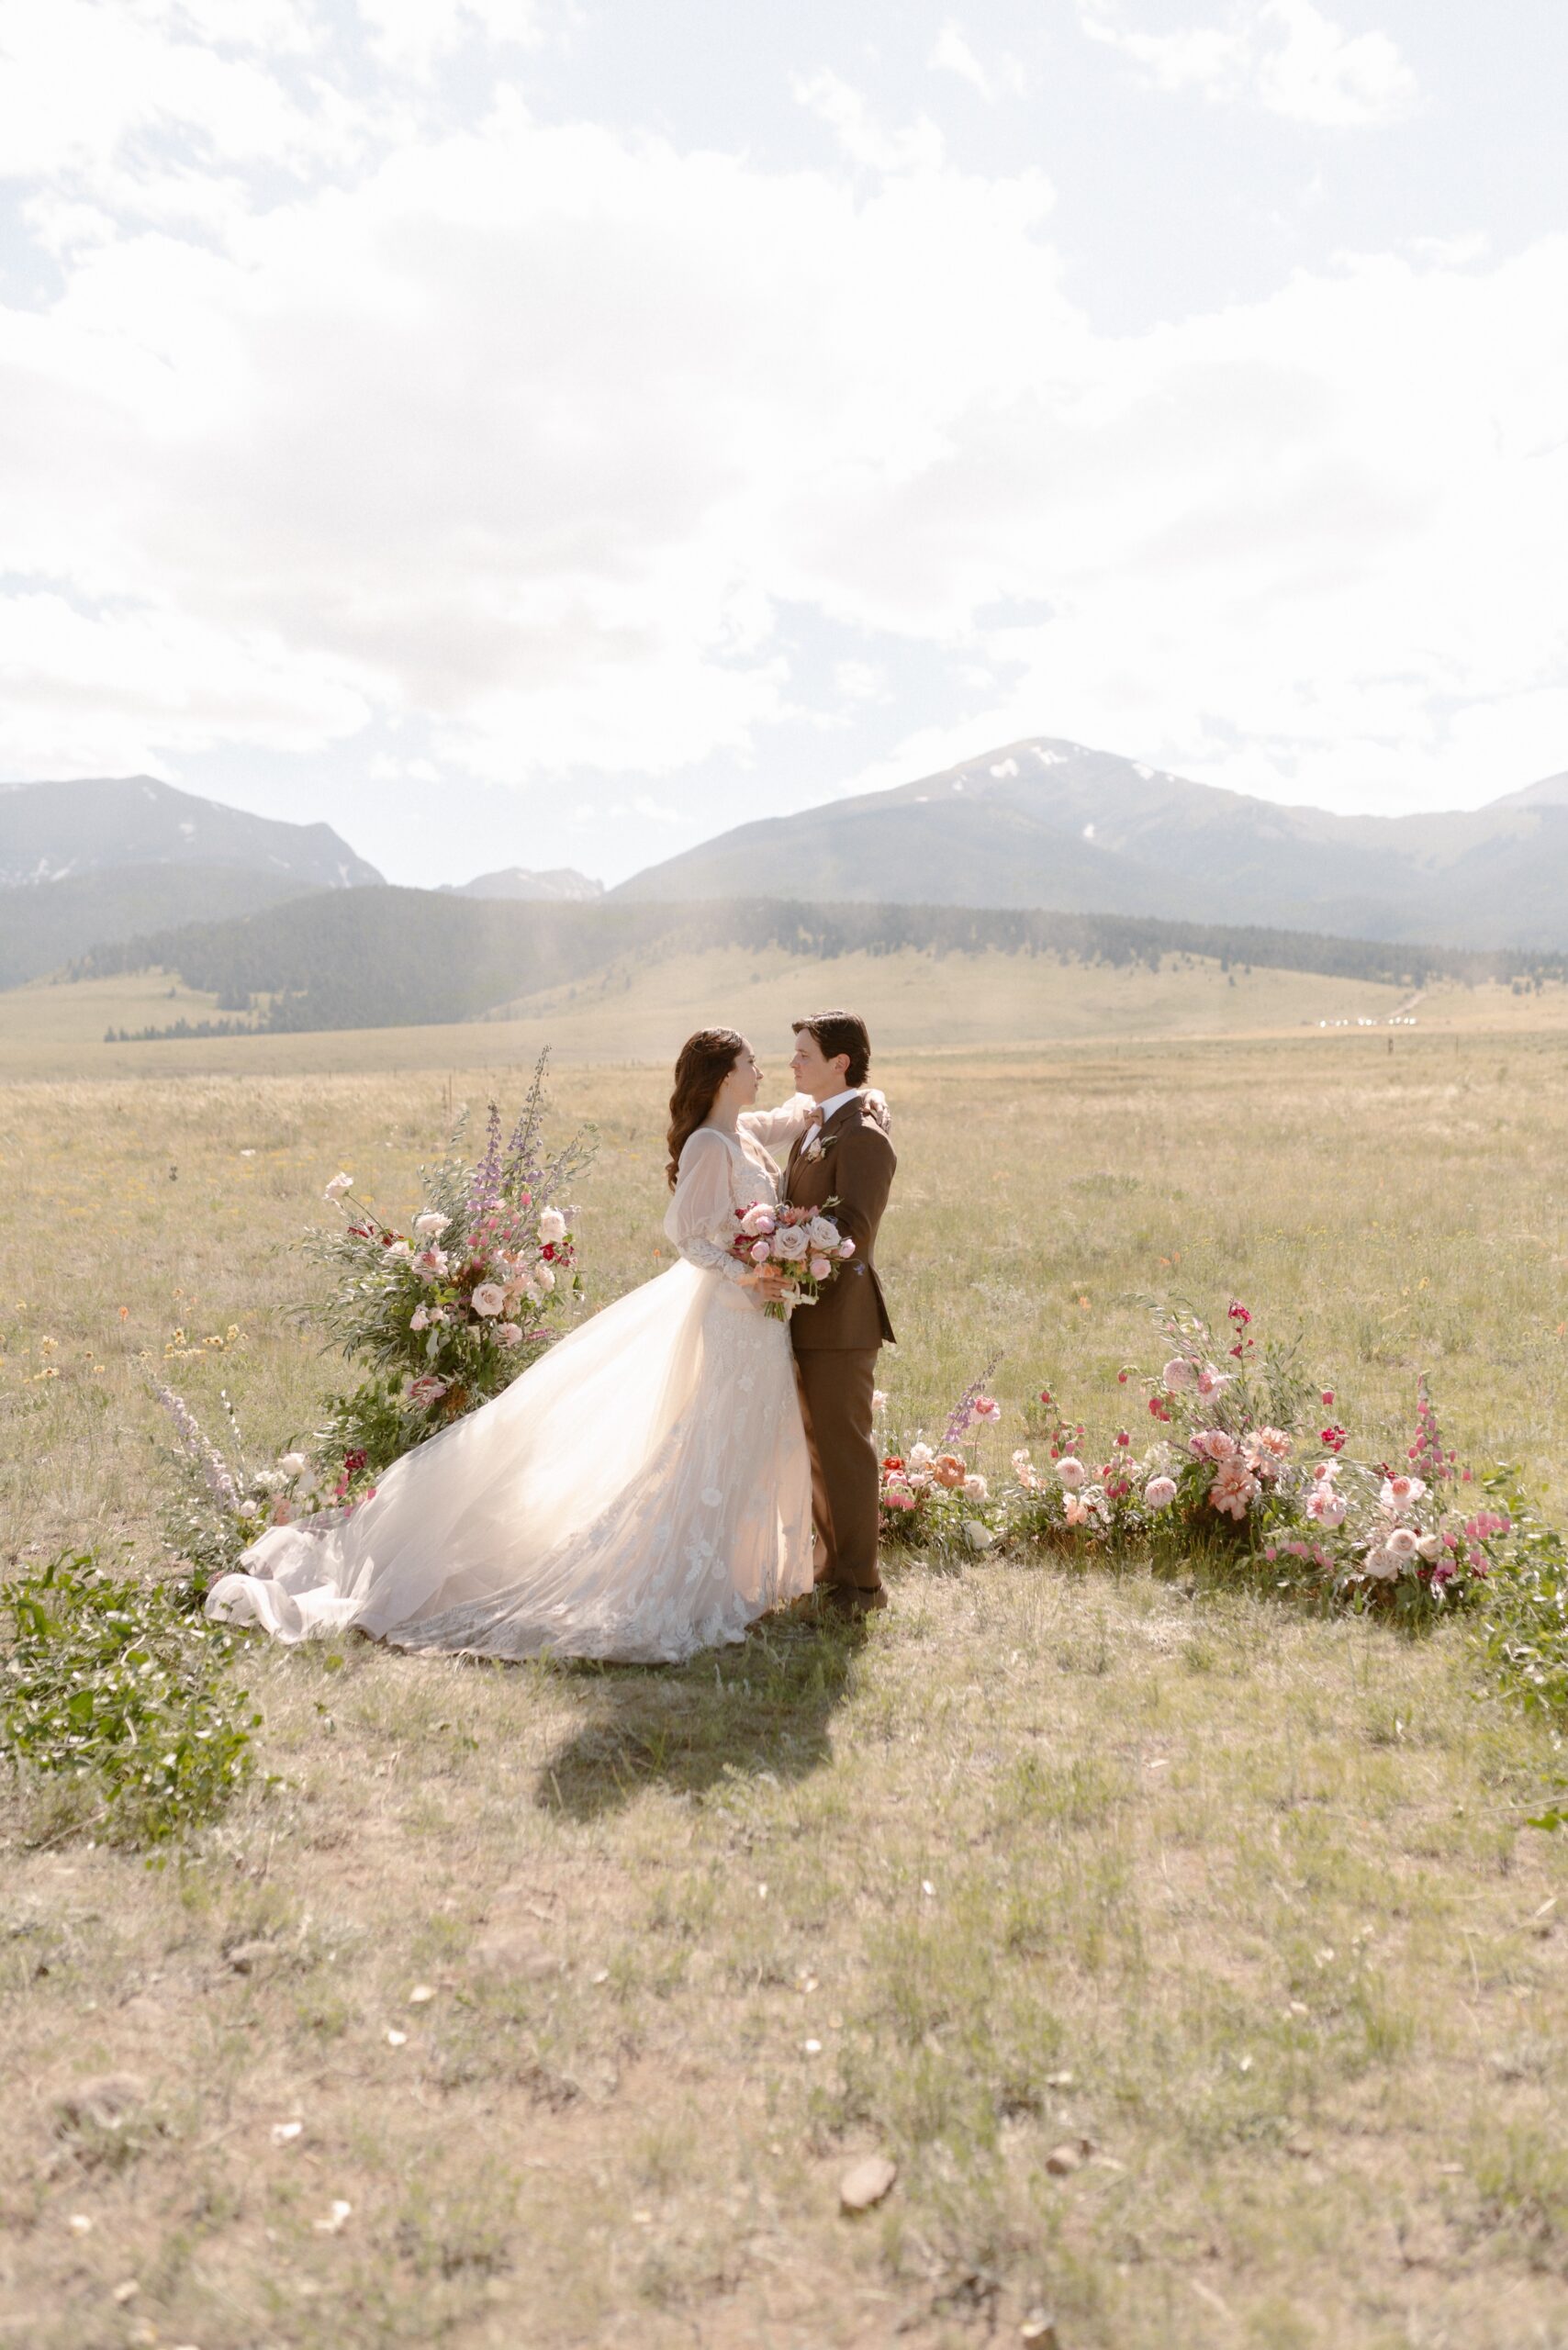 A bride and groom pose for their wedding portraits at their Three Peaks ranch wedding in a grassy field with mountains in the background. Photo by Colorado wedding photographer Ashley Joyce.